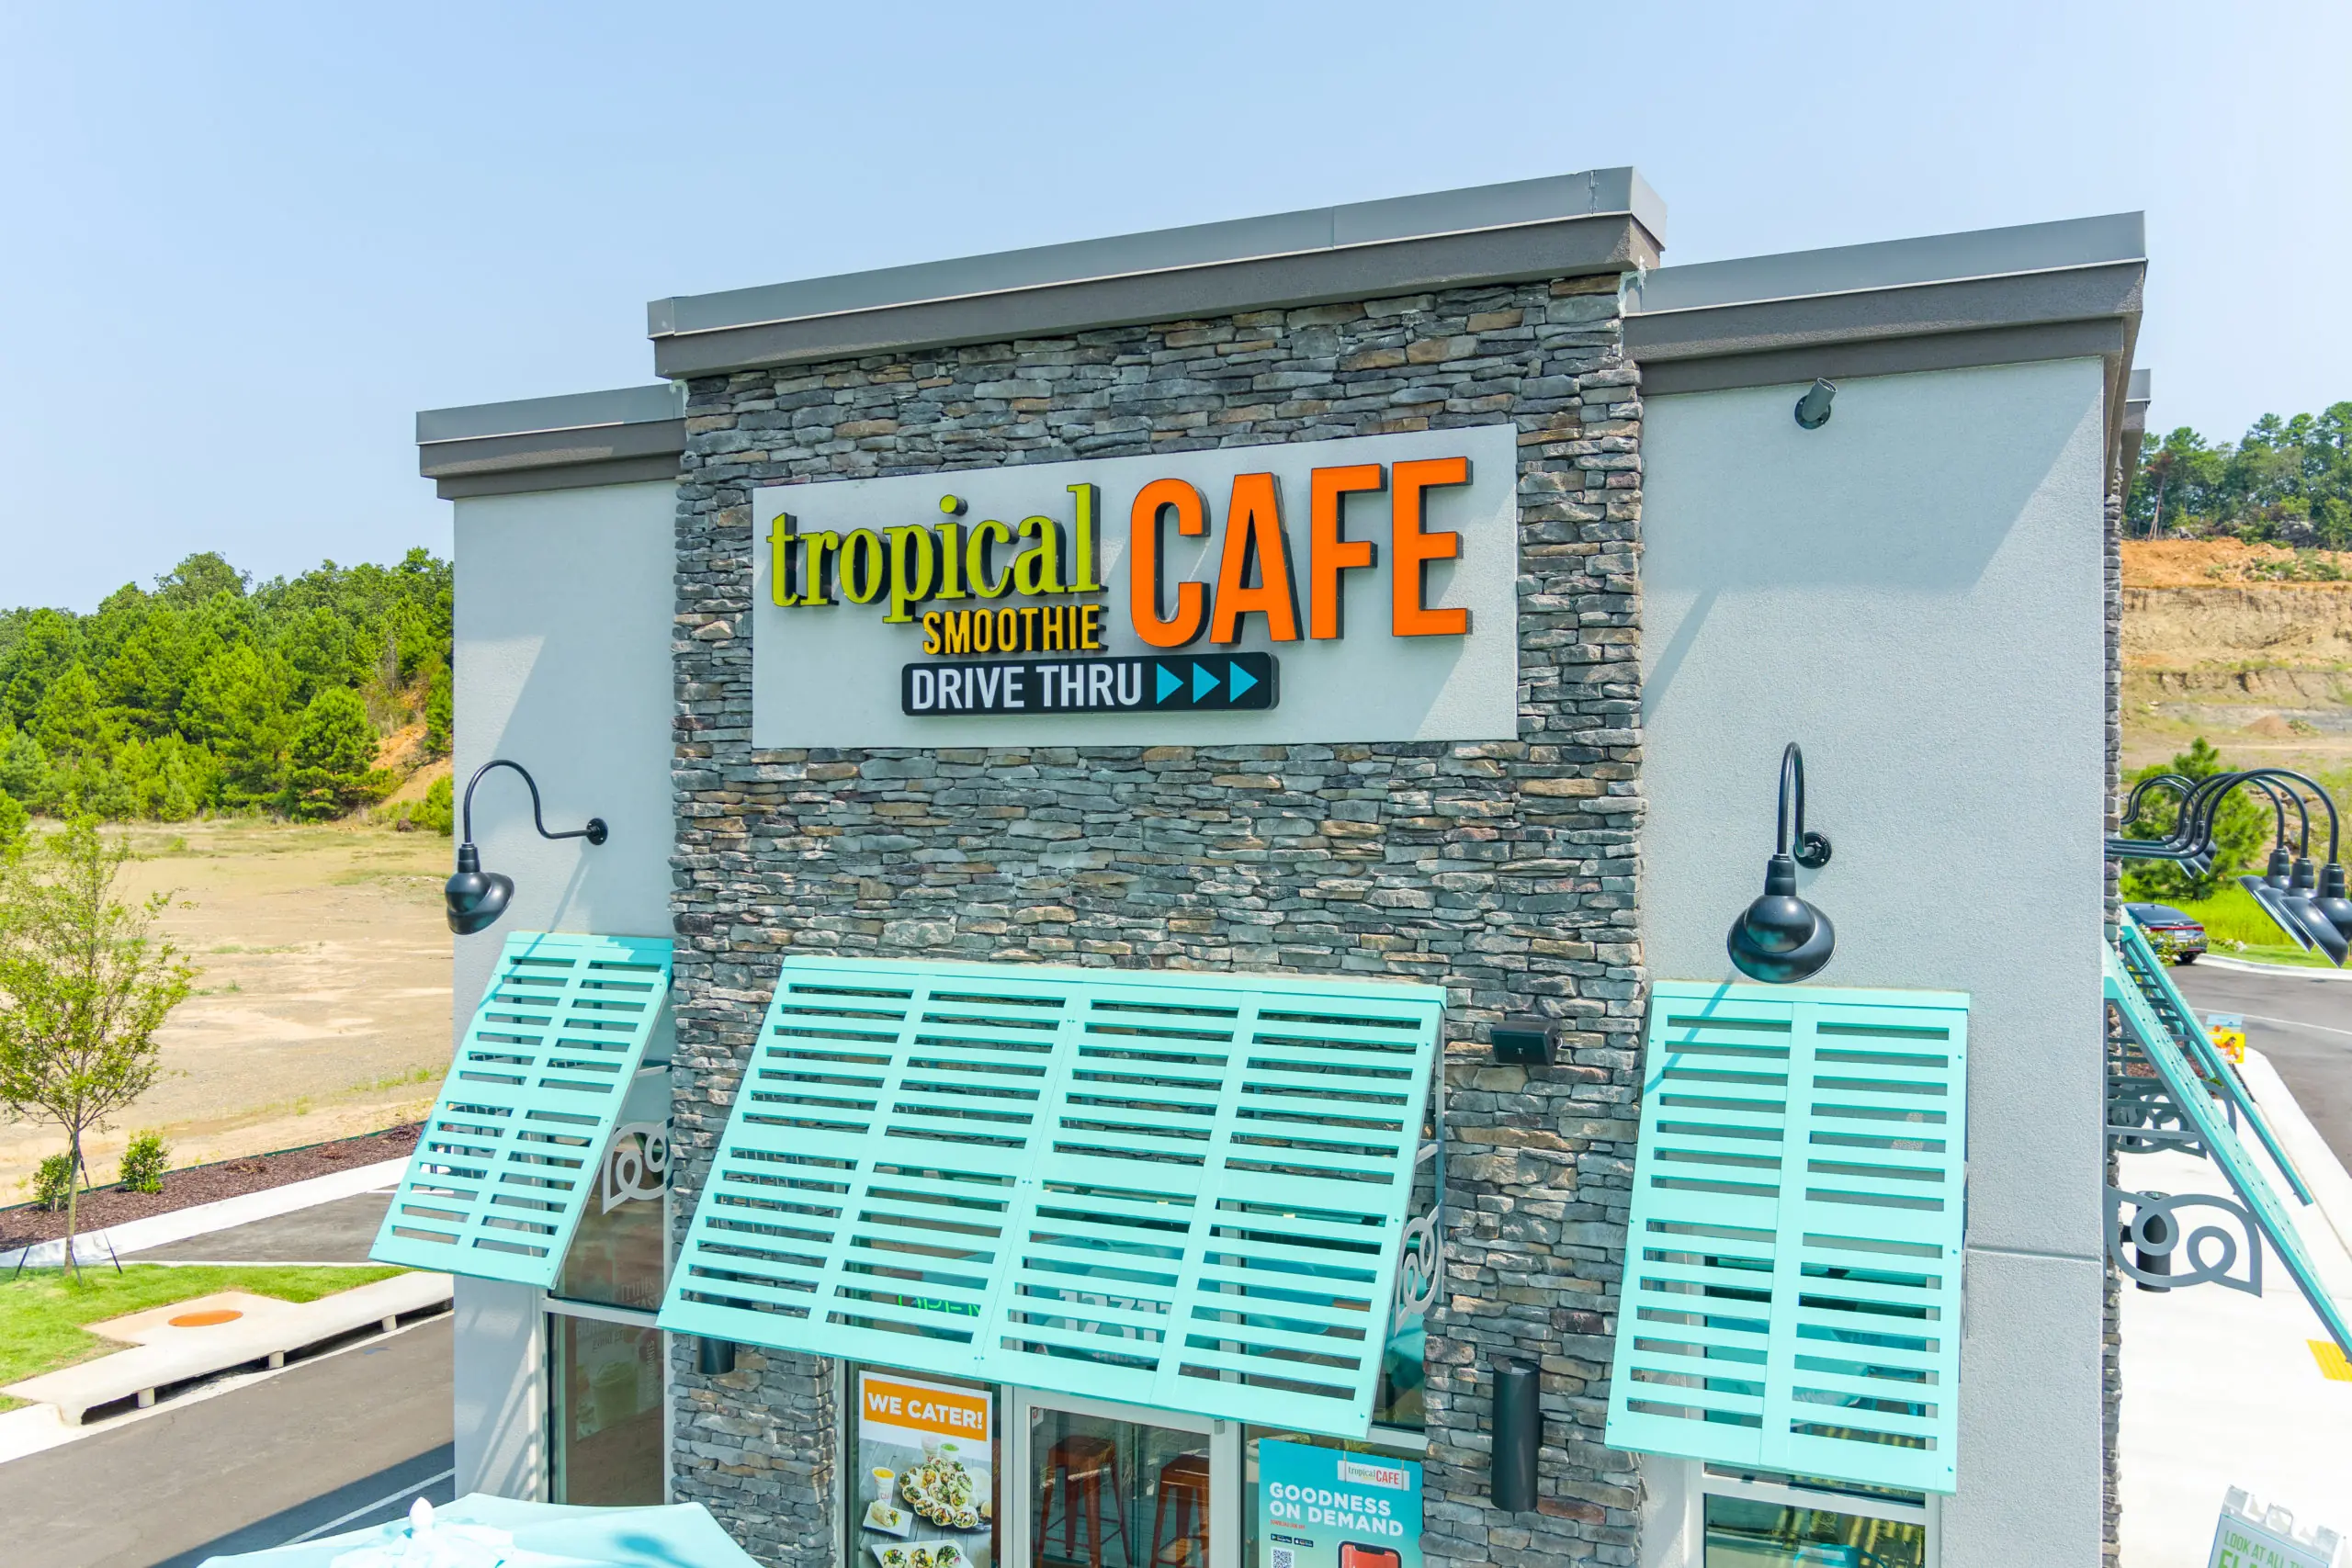 Exterior of Tropical Smoothie Cafe building with teal awnings and logo